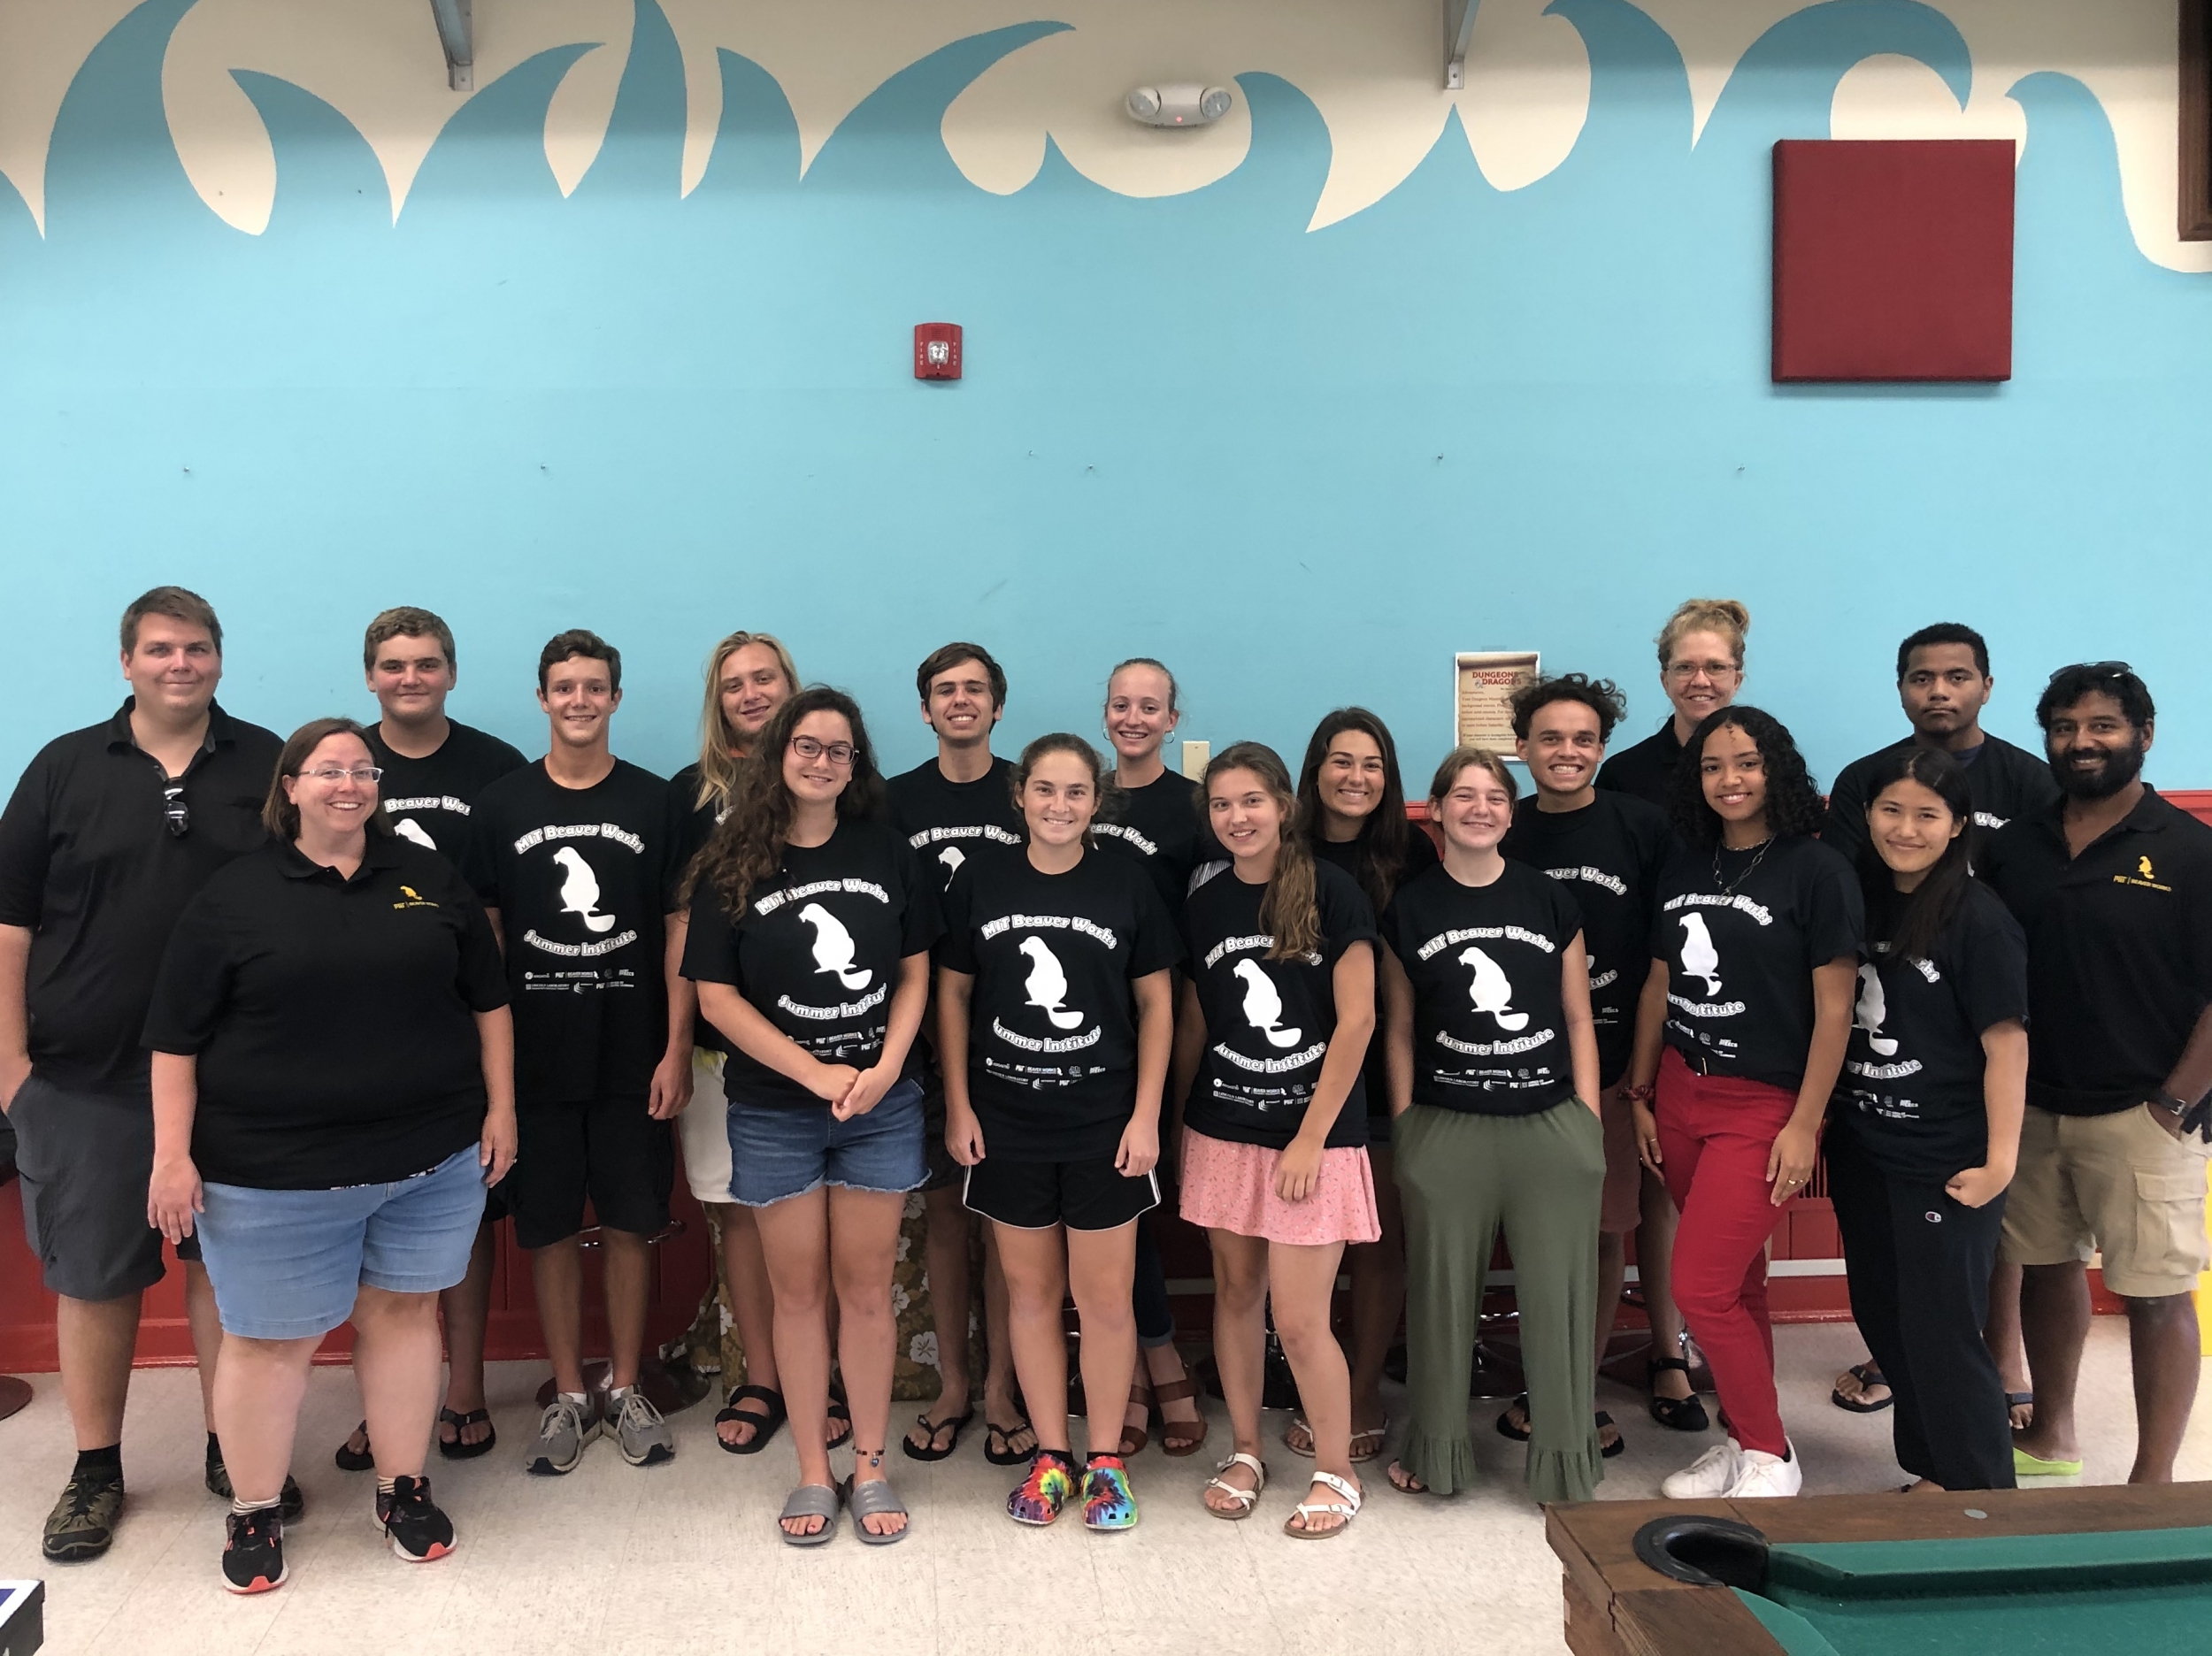 Students from the Kwajalein BWSI 2020 program pose for a photo with Laboratory staff members and instructors Jon Schoenenberger, Sarah Willis, Karyn Lundberg, and Thomas Sebastian.